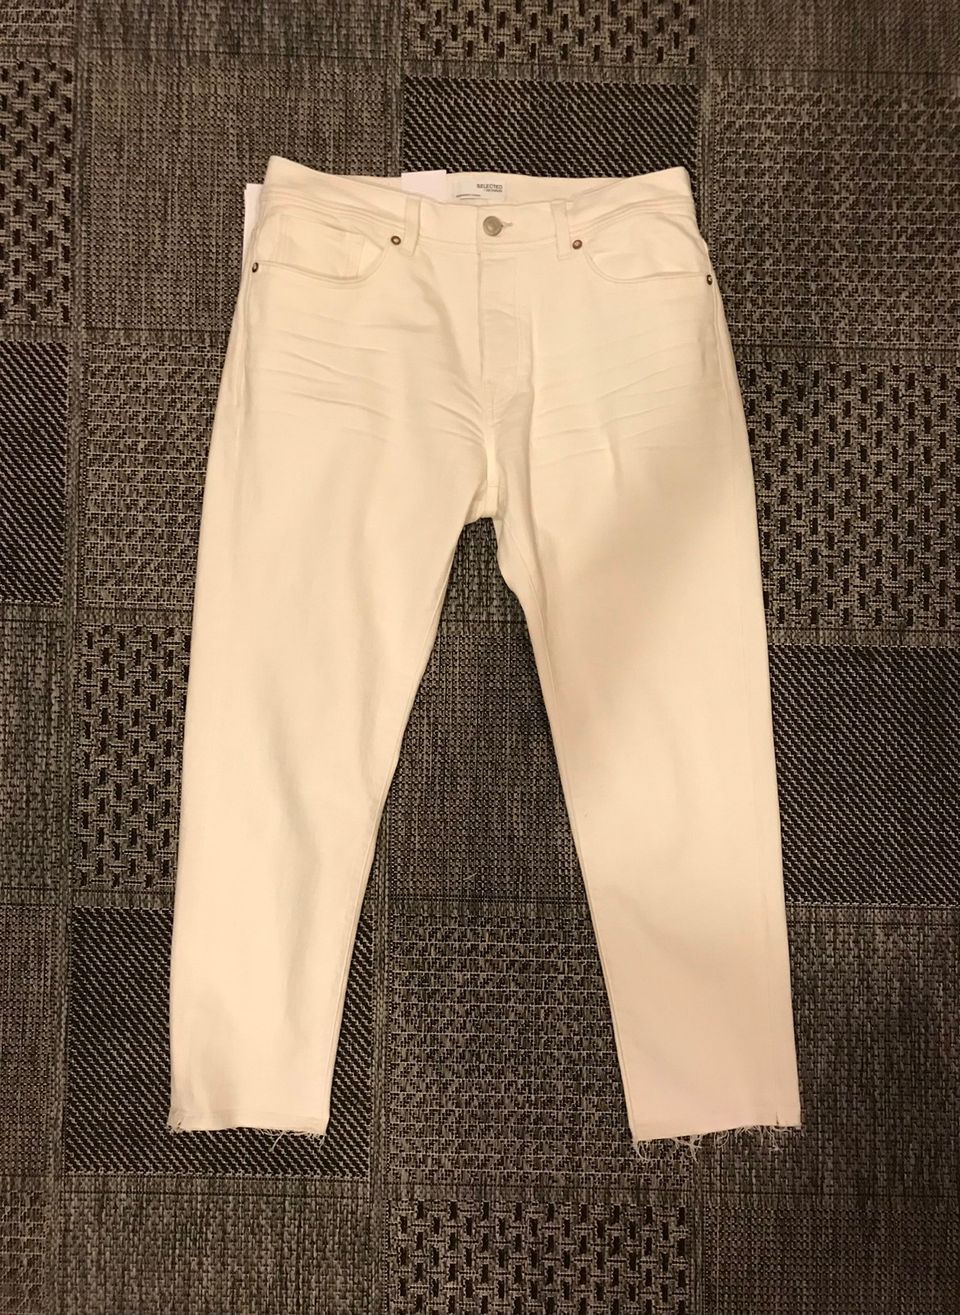 SELECTED HOMME mens 32/32 ALDO cropped tapered white jeans, fits 34/30